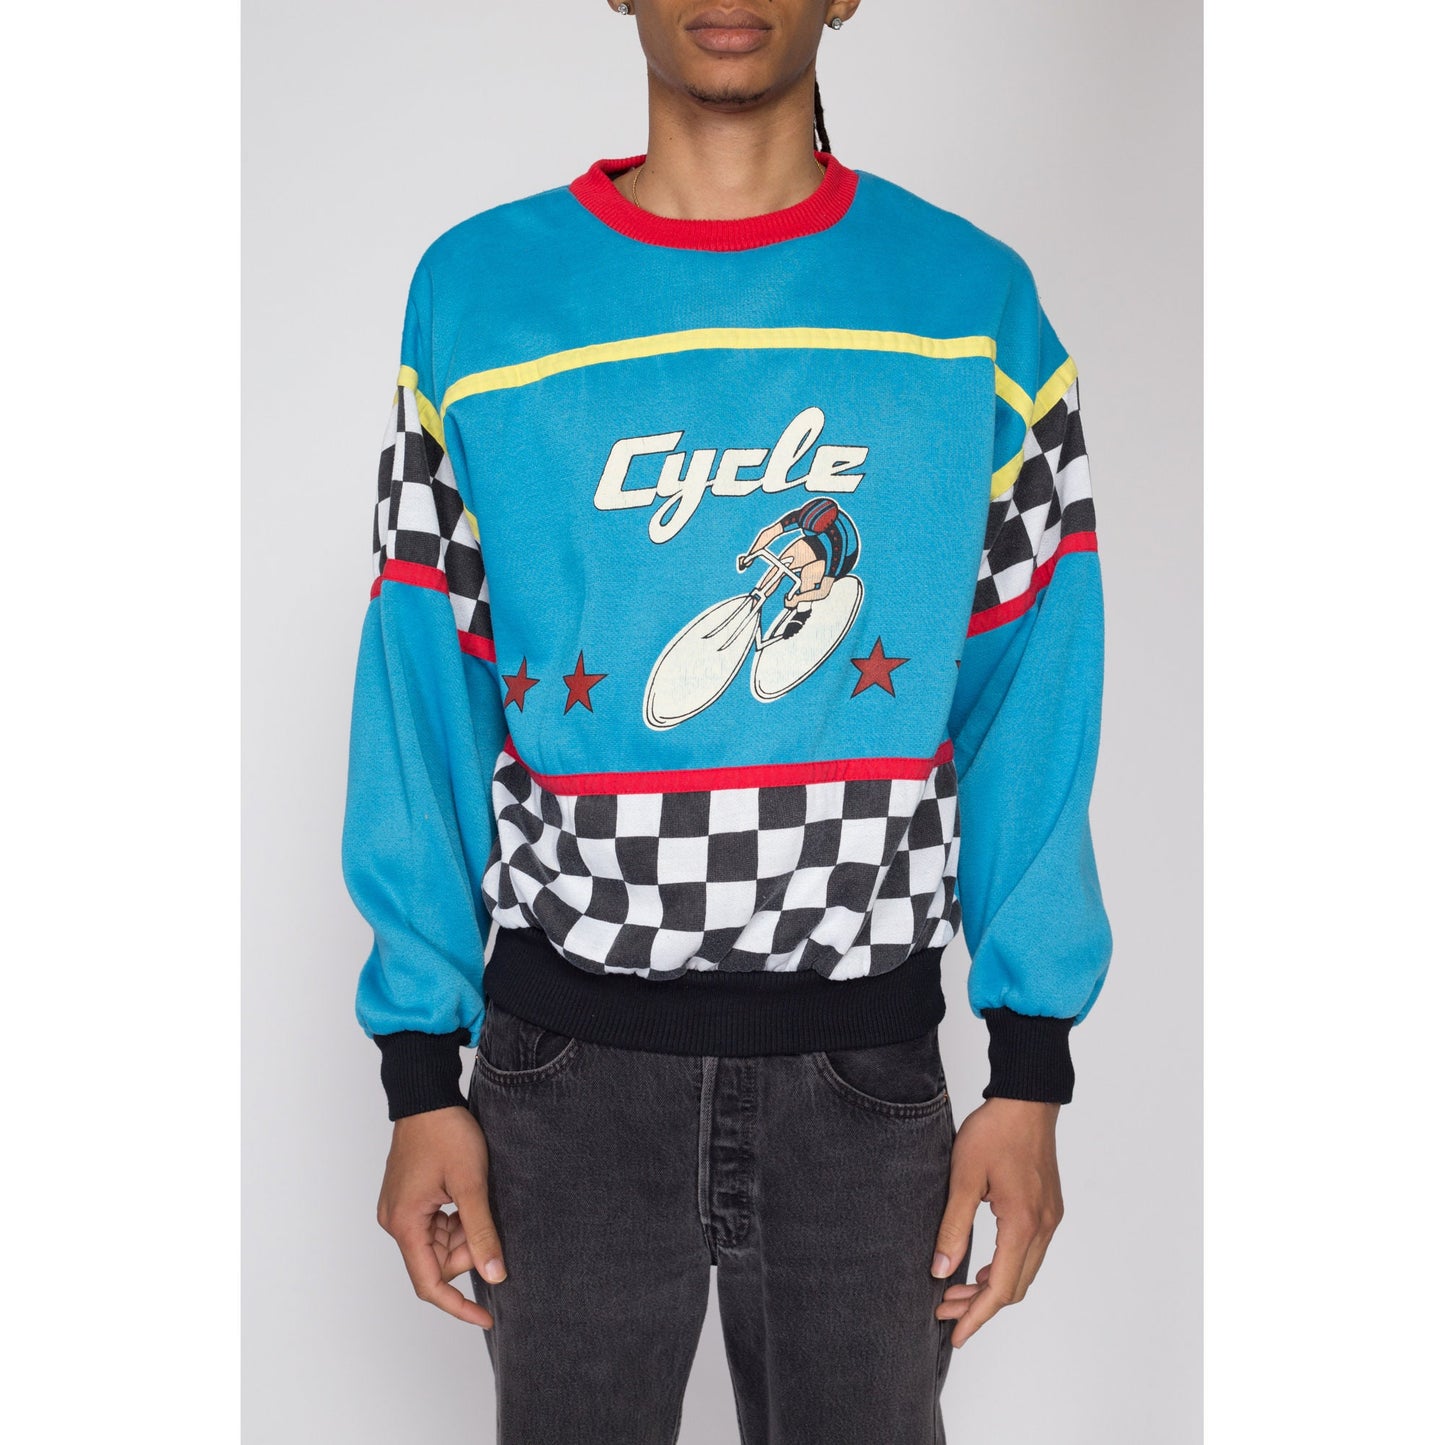 Large 80s Cycling Graphic Blue Color Block Sweatshirt | Vintage Vaporwave Aesthetic Racing Checkered Striped Pullover